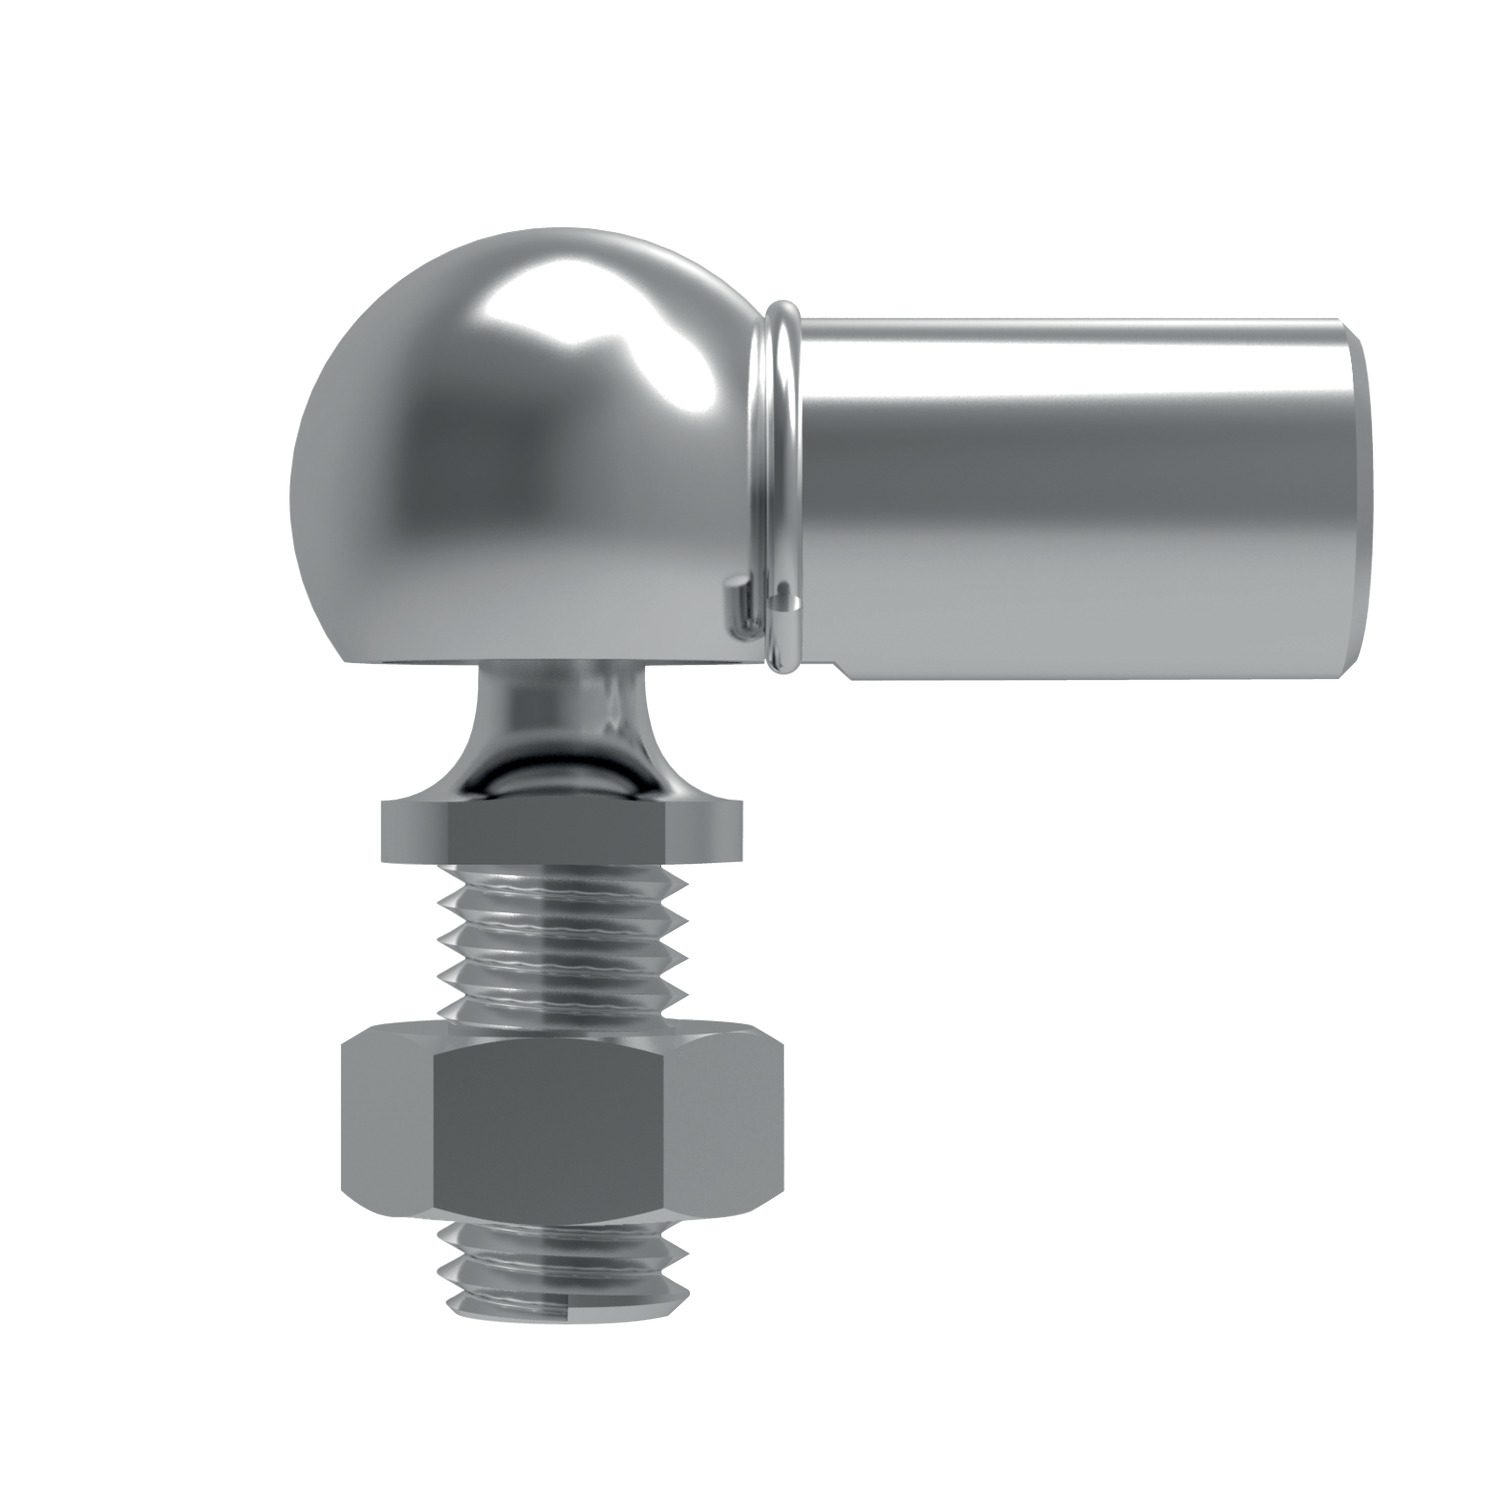 R3467 - Stainless Ball and Socket Joints